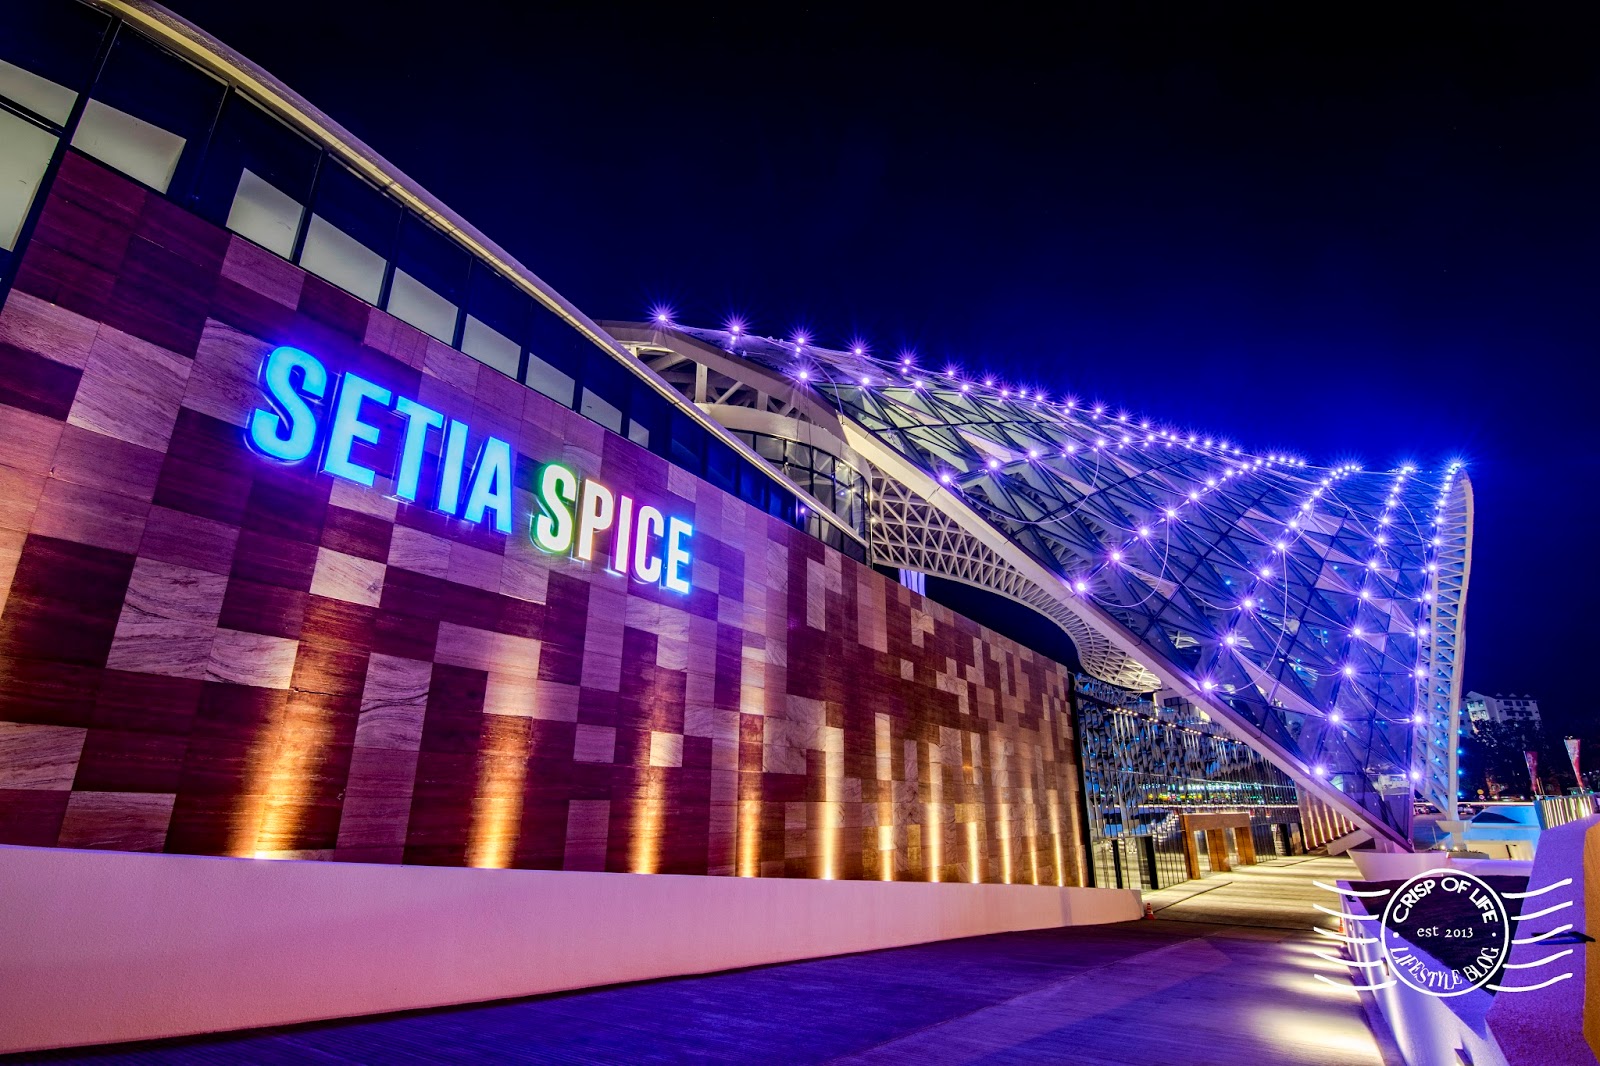 New Look of Setia Spice Convention Center @ Relau, Penang ...